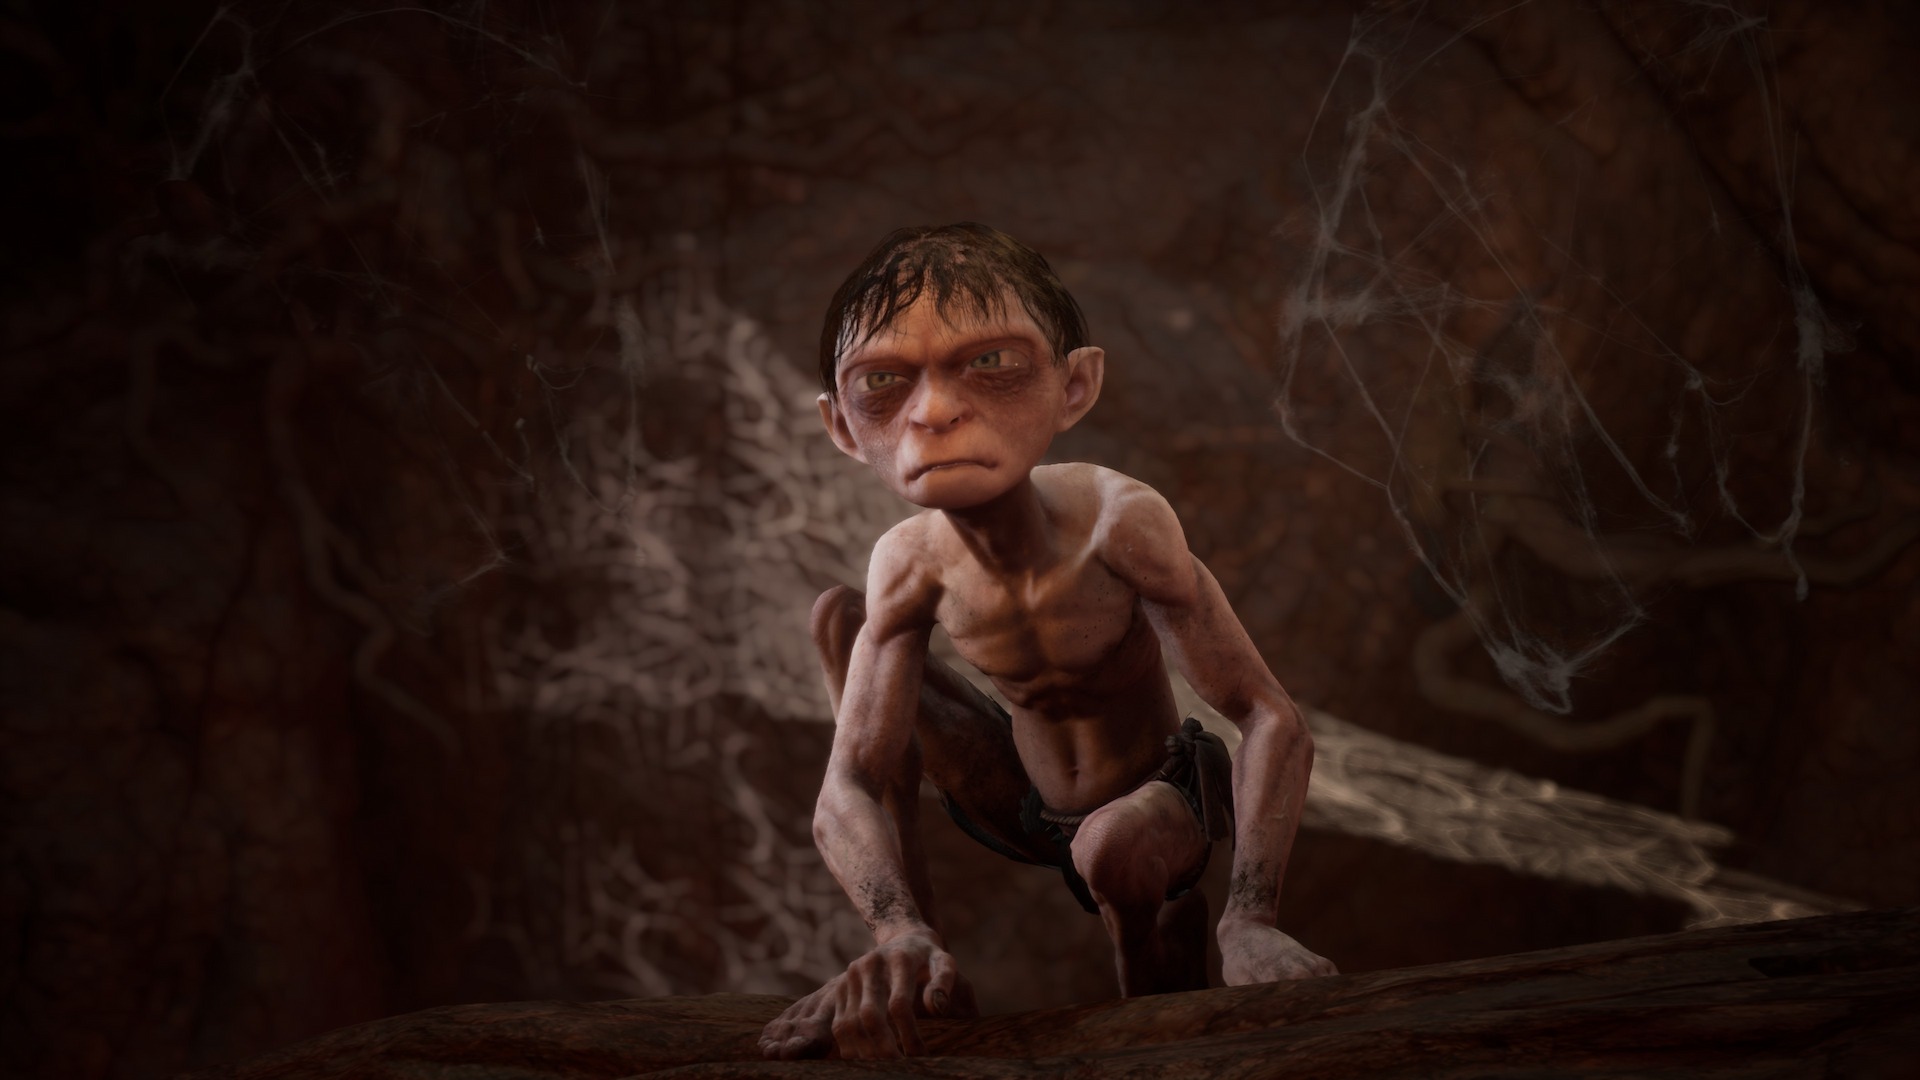 Lord of the Rings: Gollum apology was reportedly written by ChatGPT -  Dexerto